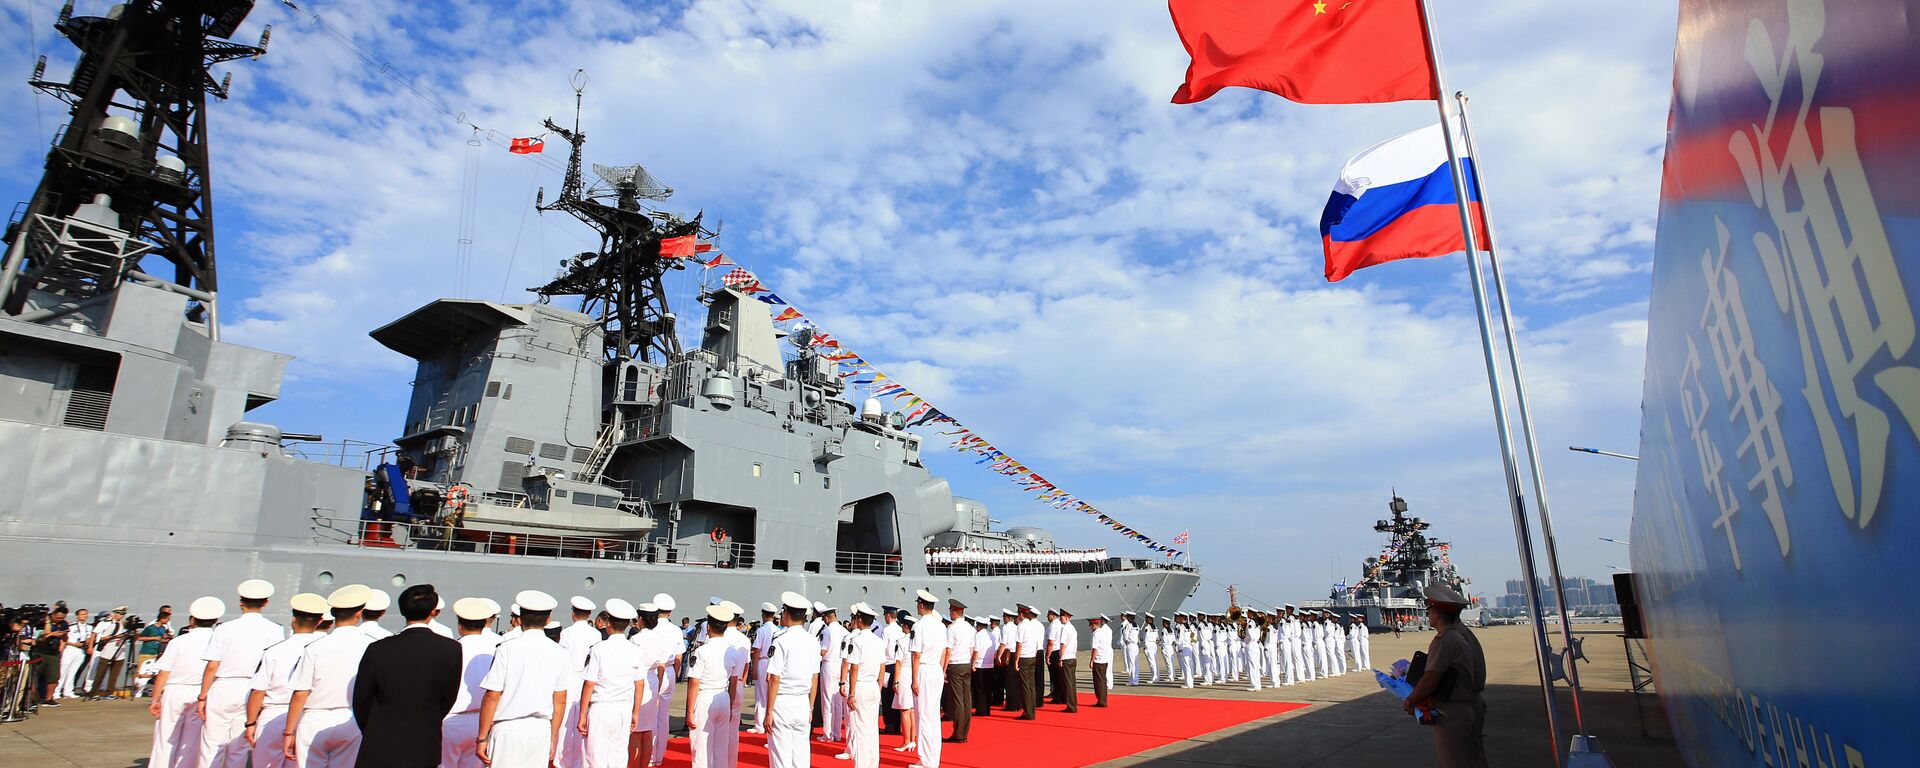 In this photo released by China's Xinhua News Agency, officers and soldiers of China's People's Liberation Army (PLA) Navy hold a welcome ceremony as a Russian naval ship arrives in port in Zhanjiang in southern China's Guangdong Province, Monday, Sept. 12, 2016 - Sputnik International, 1920, 20.10.2021